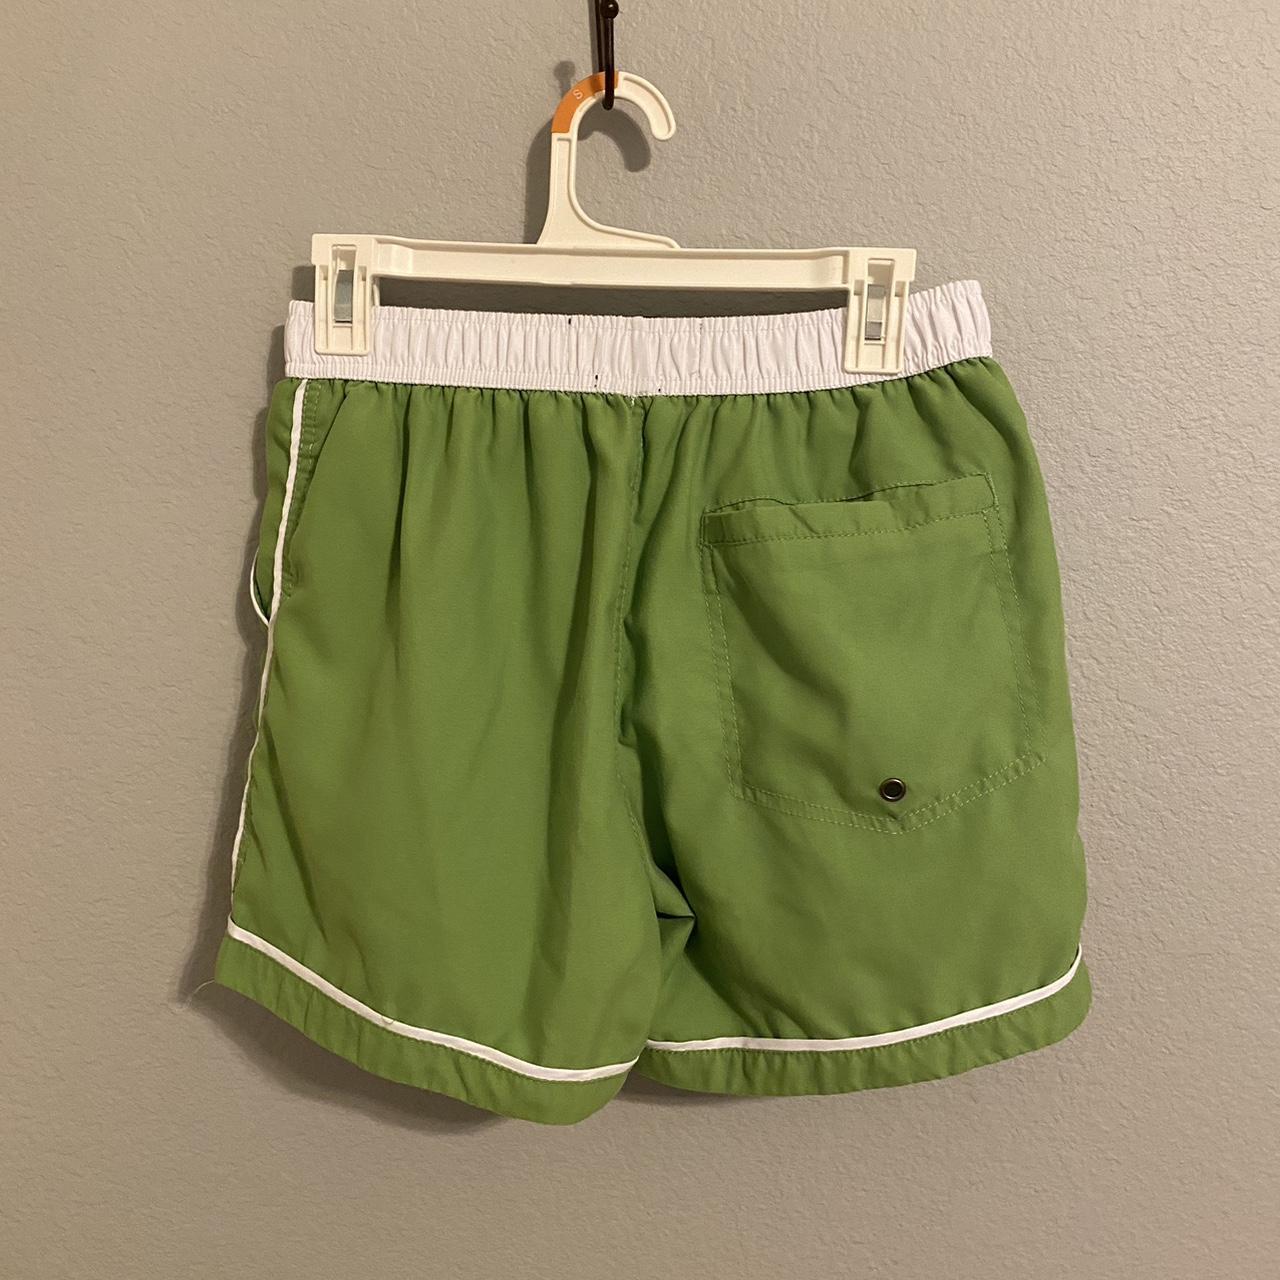 Native Youth Men's Green and White Swim-briefs-shorts (5)